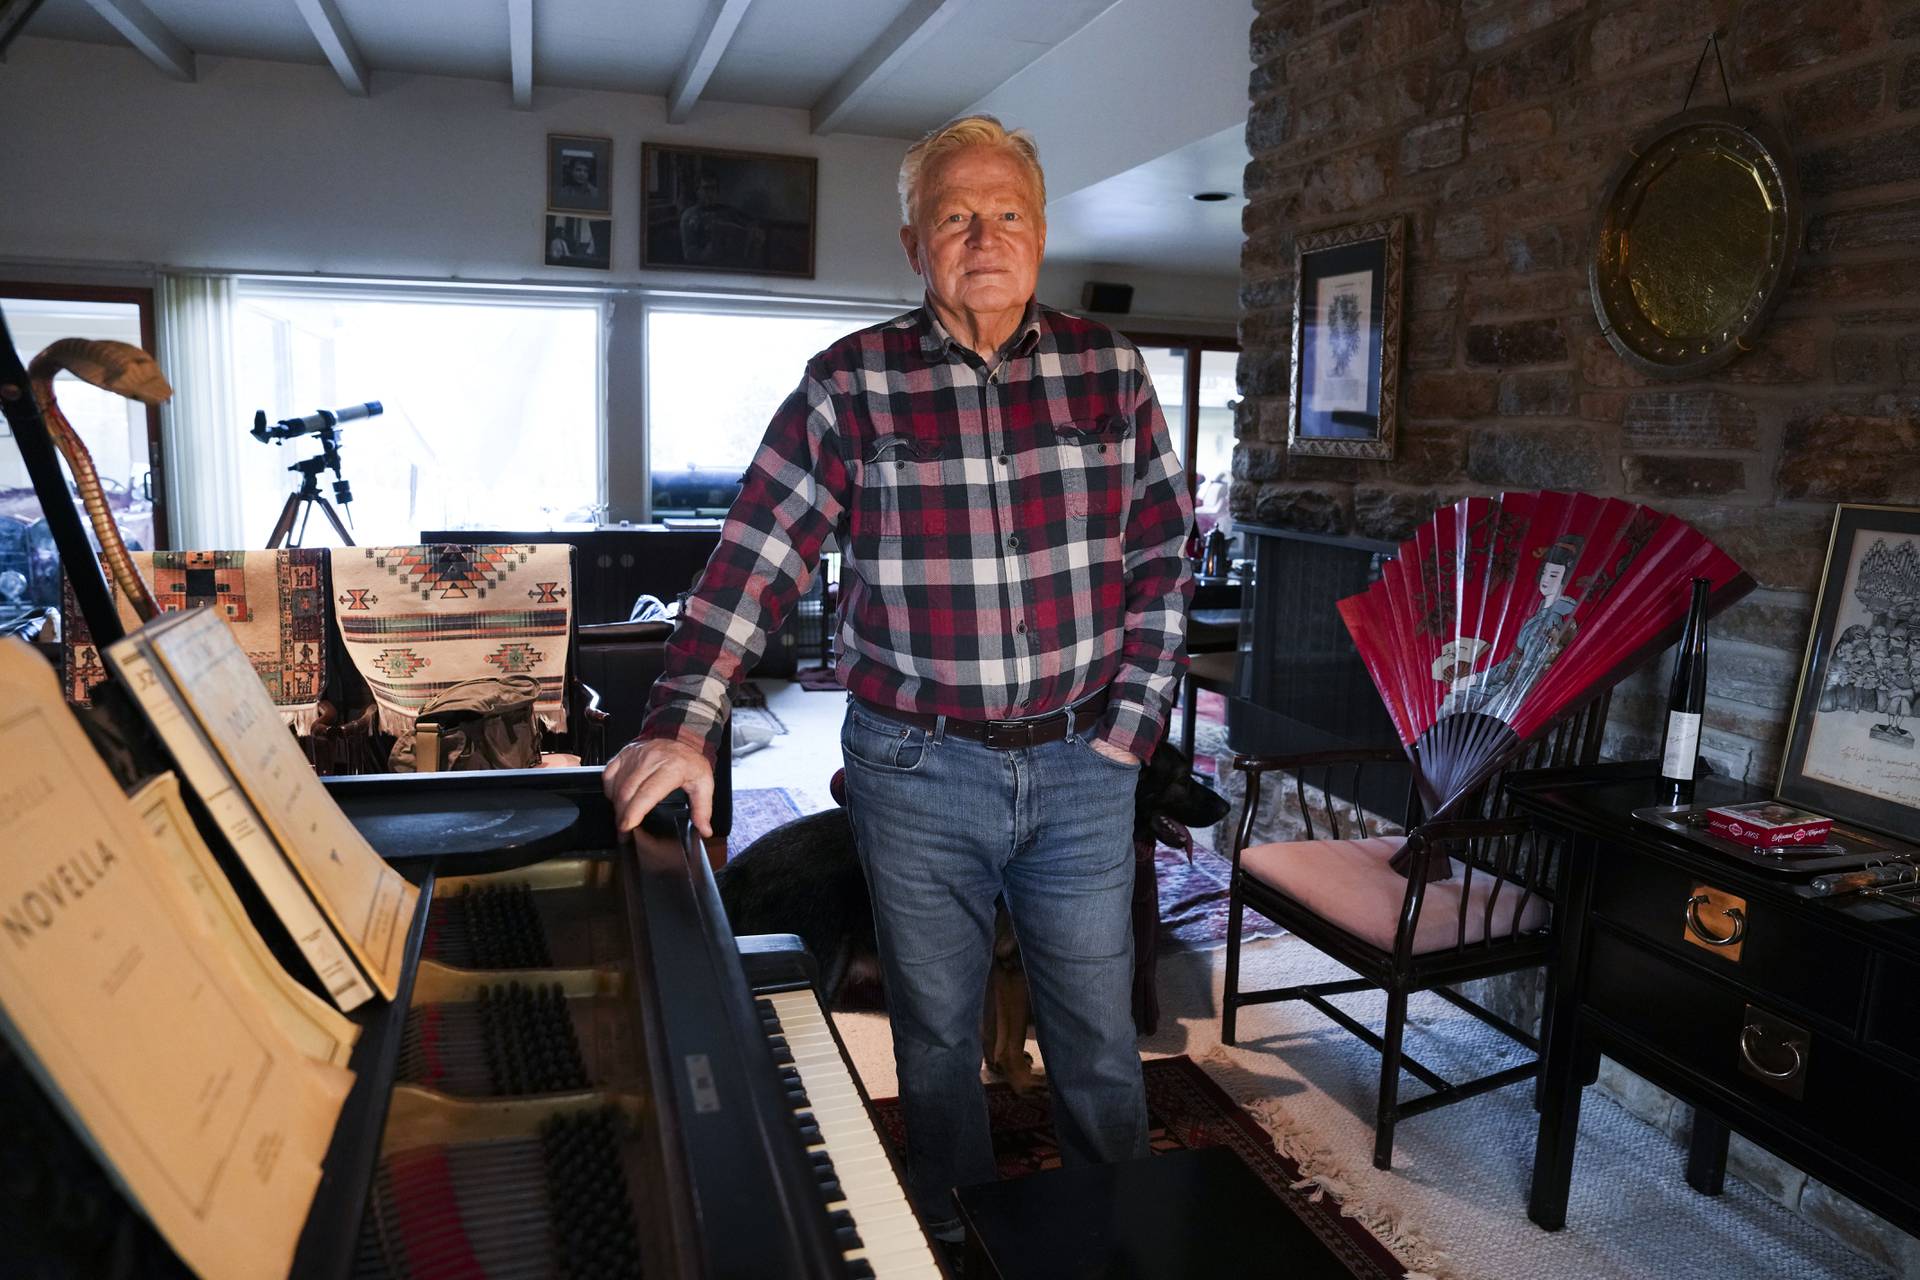 Rob Fiscella is the owner of a Steinway piano that belonged to his late friend, Agi Jambor, a famous pianist from Europe and one of the premier players of Bach back in her day. He wishes for people to come play the piano.